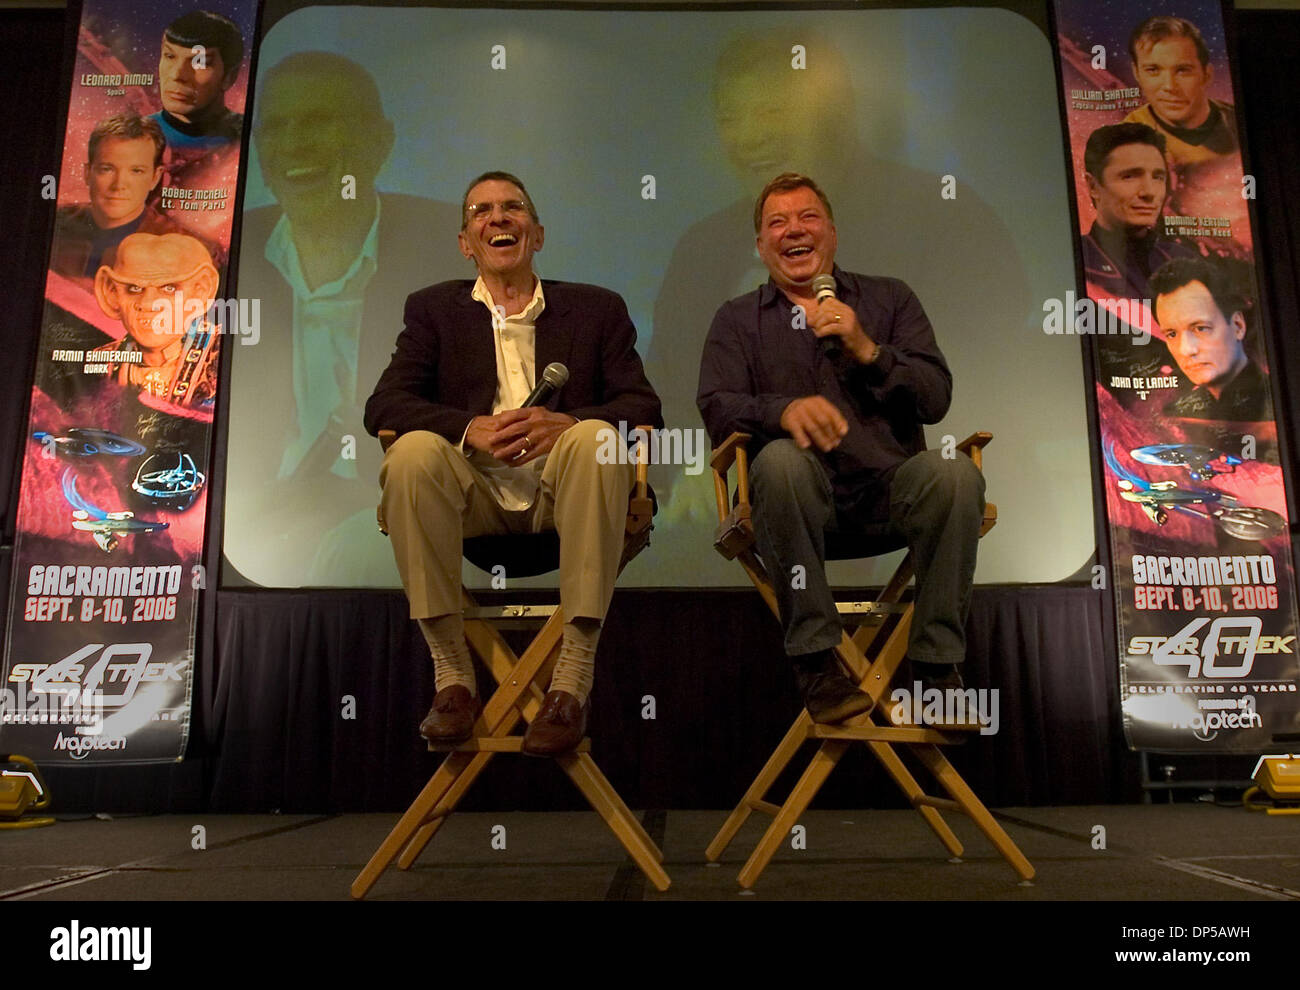 Sep 10, 2006; Sacramento, CA, USA; WILLIAM SHATNER who played Caption Kirk, right, and LEONARD NIMOY who played Mr. Spock on the series Star Trek celebrated the 40th anniversary of  the show with a rare appearance together at a convention at the Double Tree hotel in Sacramento on Sunday.  Mandatory Credit: Photo by RenZe C. Byer/Sacramanto Bee/ZUMA Press. (©) Copyright 2006 by Sacr Stock Photo